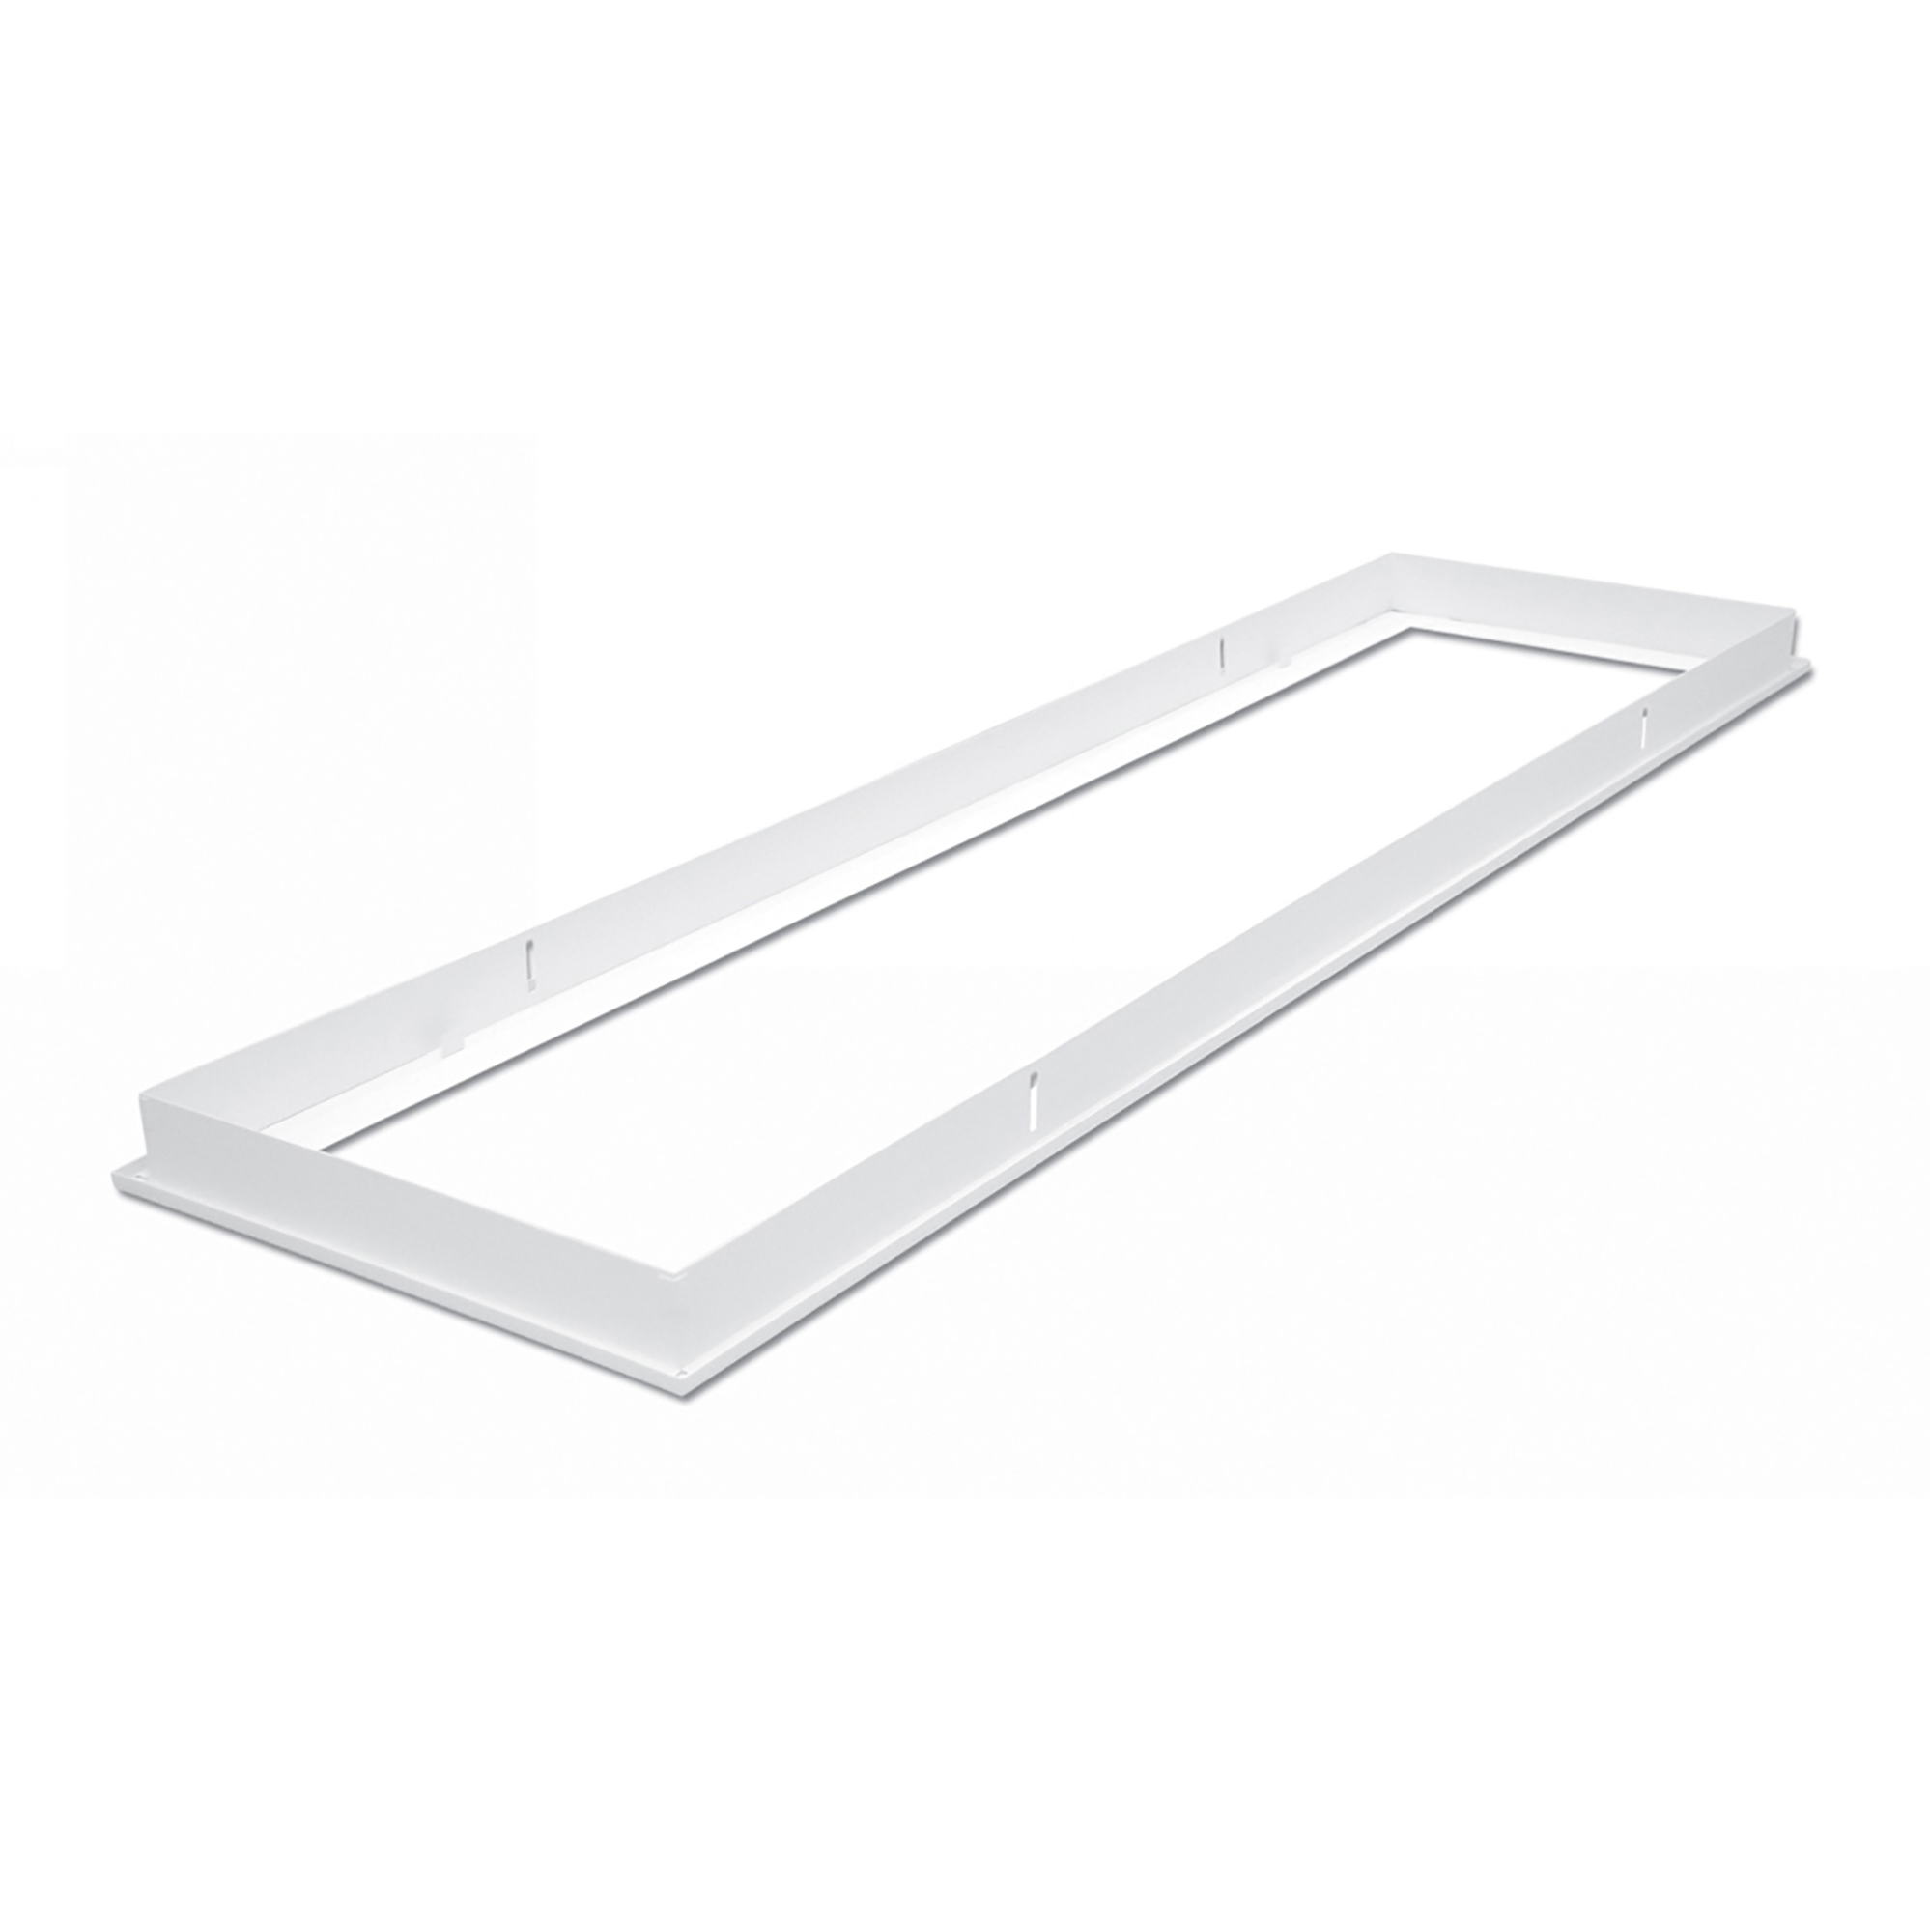 DA240008/TW  Piano 123 Flush Recessed Frame For Plaster Board In Textured White, 1225x345x45mm, Cut-Out 1205x325mm For Panel, 5yrs Warranty